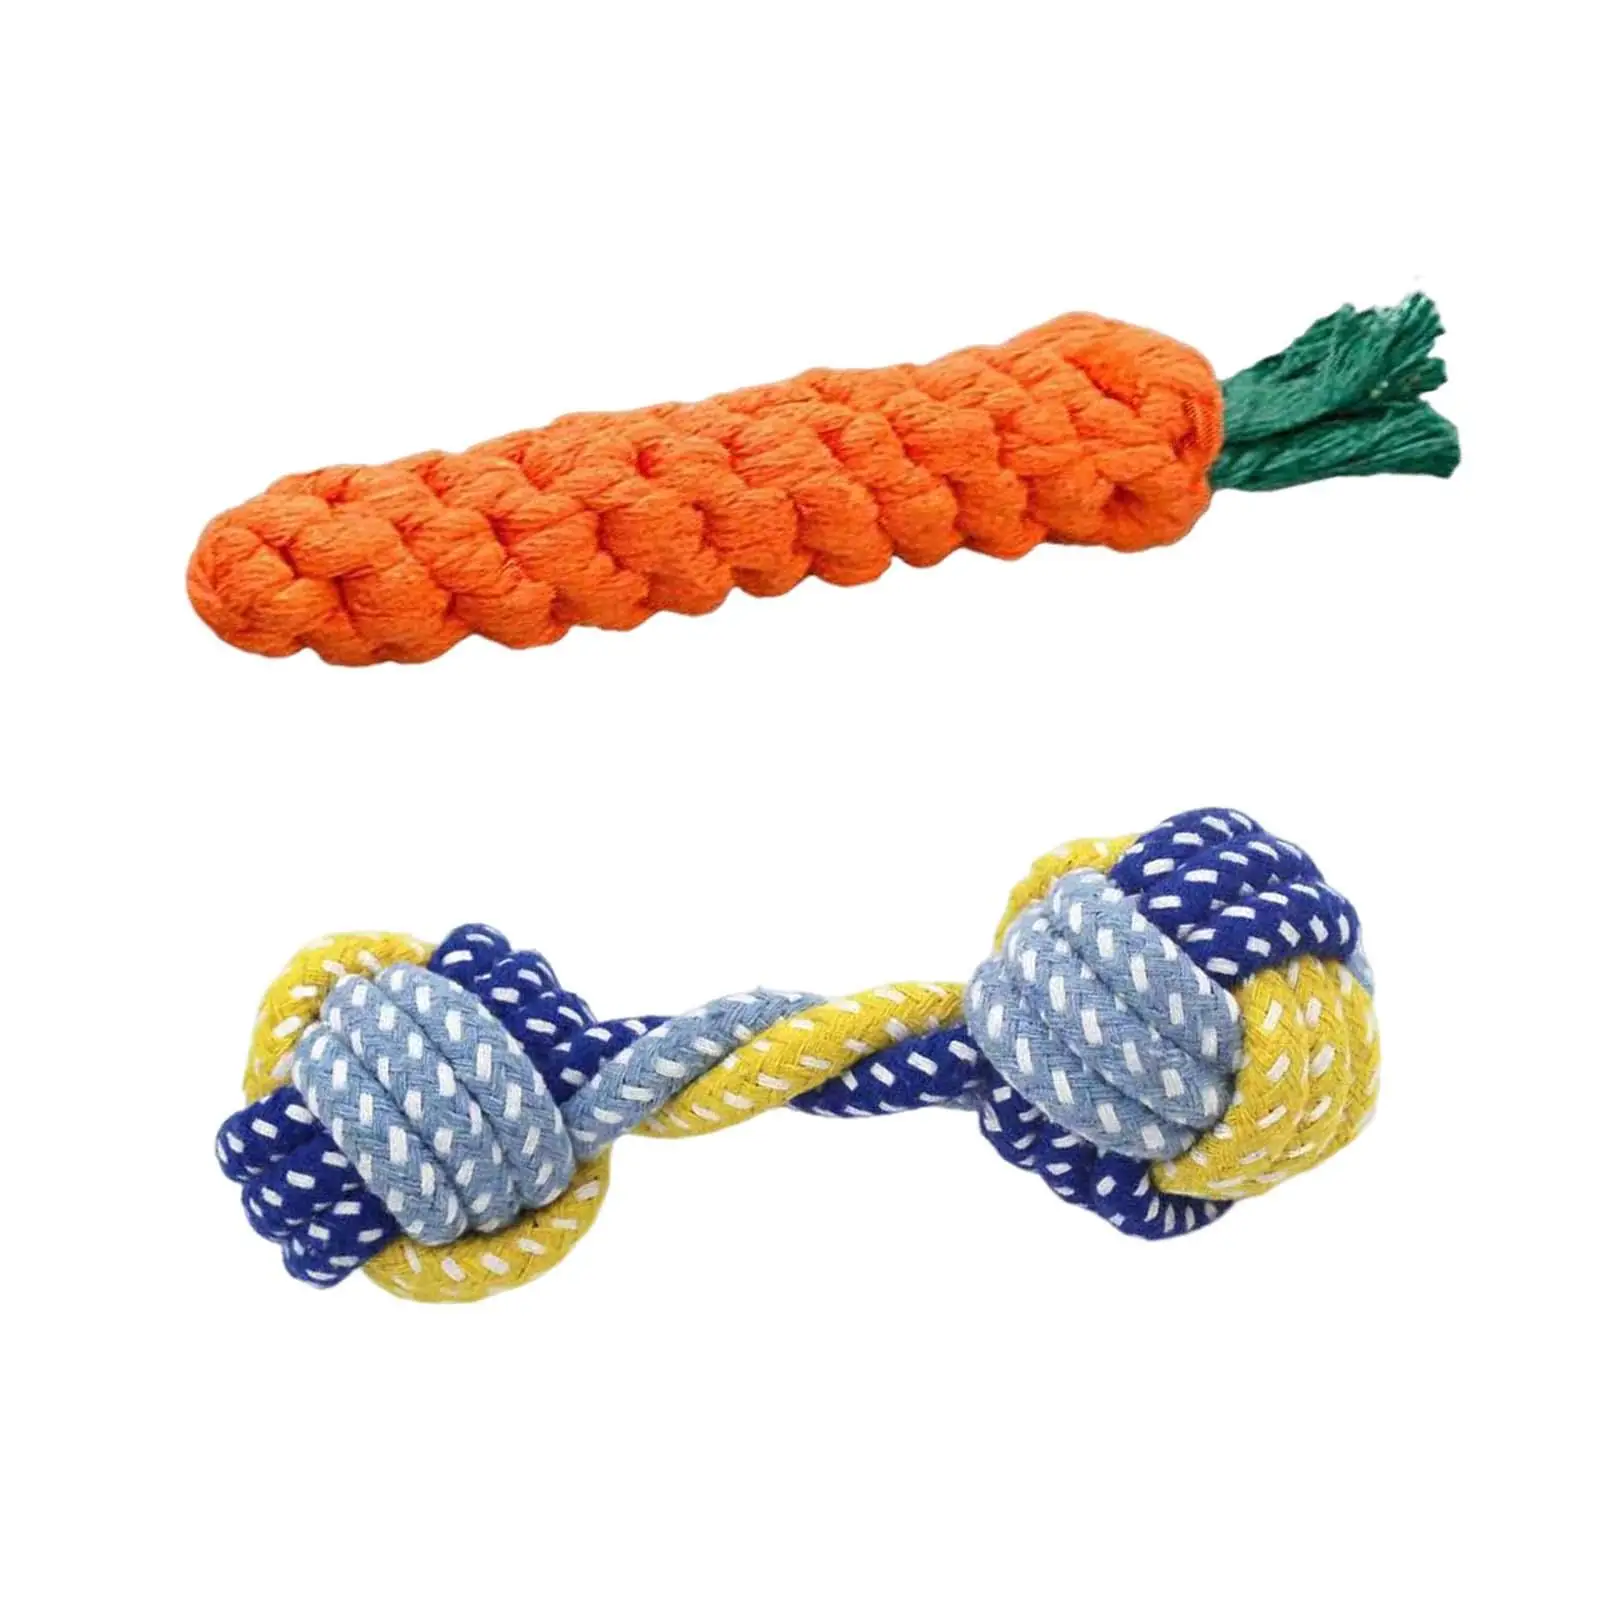 Durable Dog Chew Toy Puppy Teething Toy for Aggressive Chewers Interactive Training Bite Resistant Playing Cotton Toy